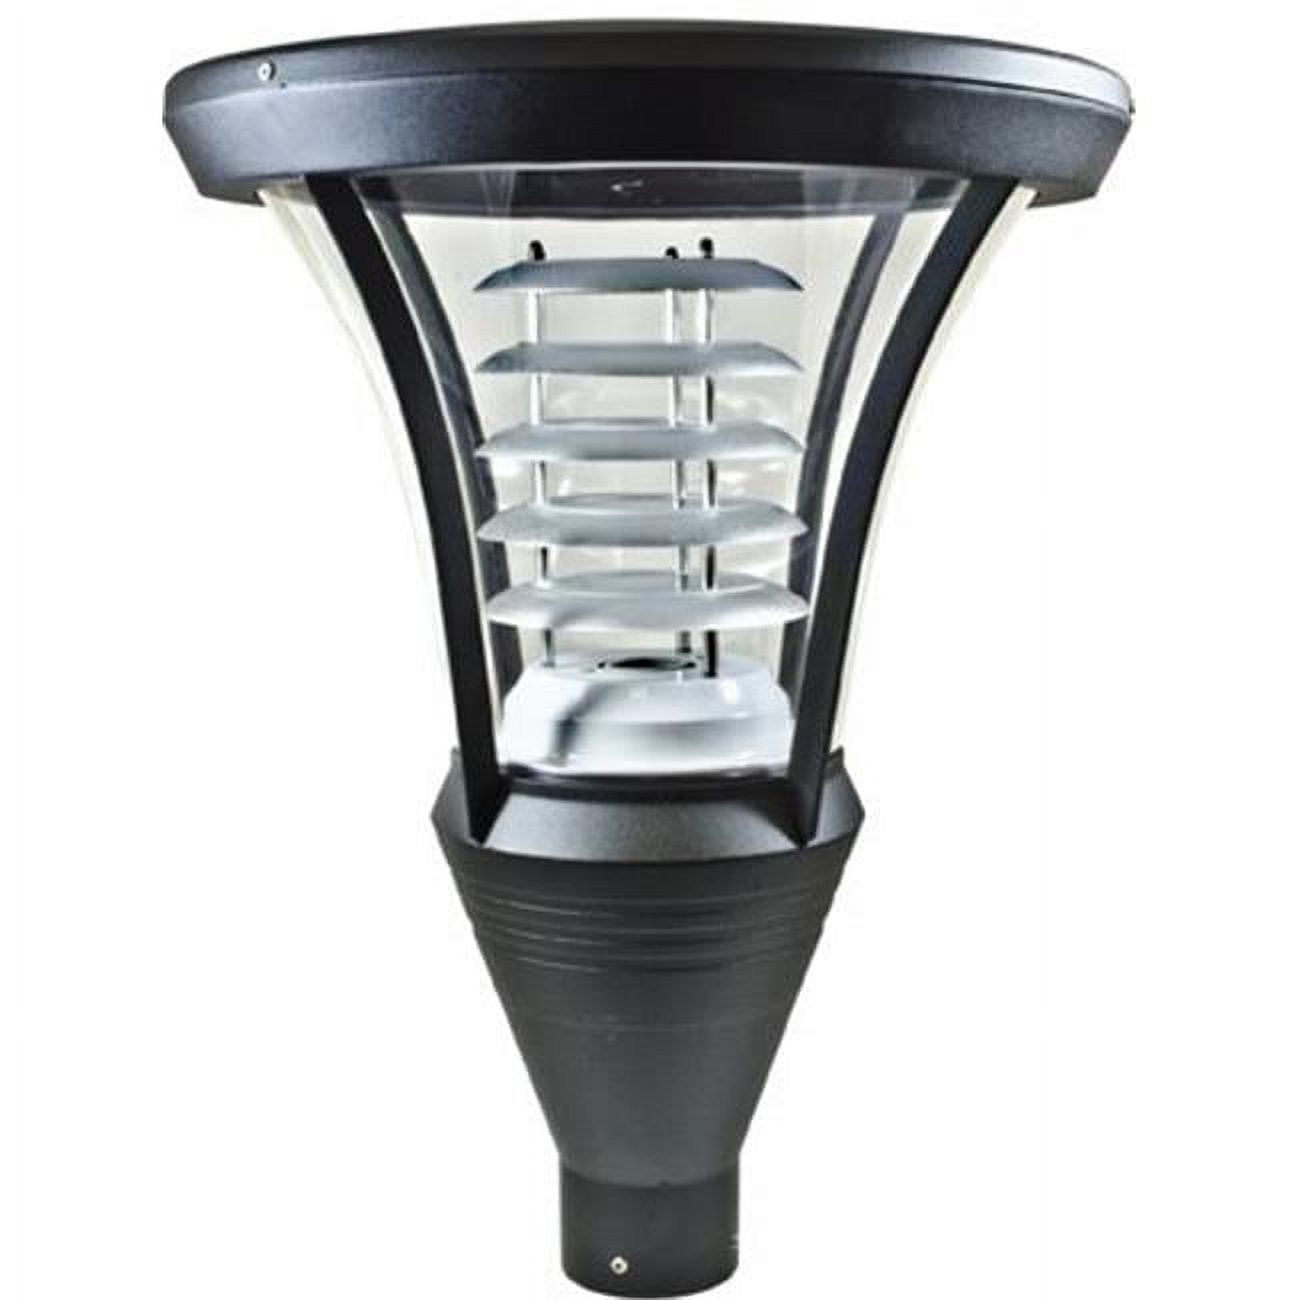 Picture of Dabmar Lighting GM642-B 50W 120V Powder Coated Cast Aluminum Post Top Light Fixture with High Pressure Sodium Lamp, Black - 22.75 x 17.25 x 17.25 in.